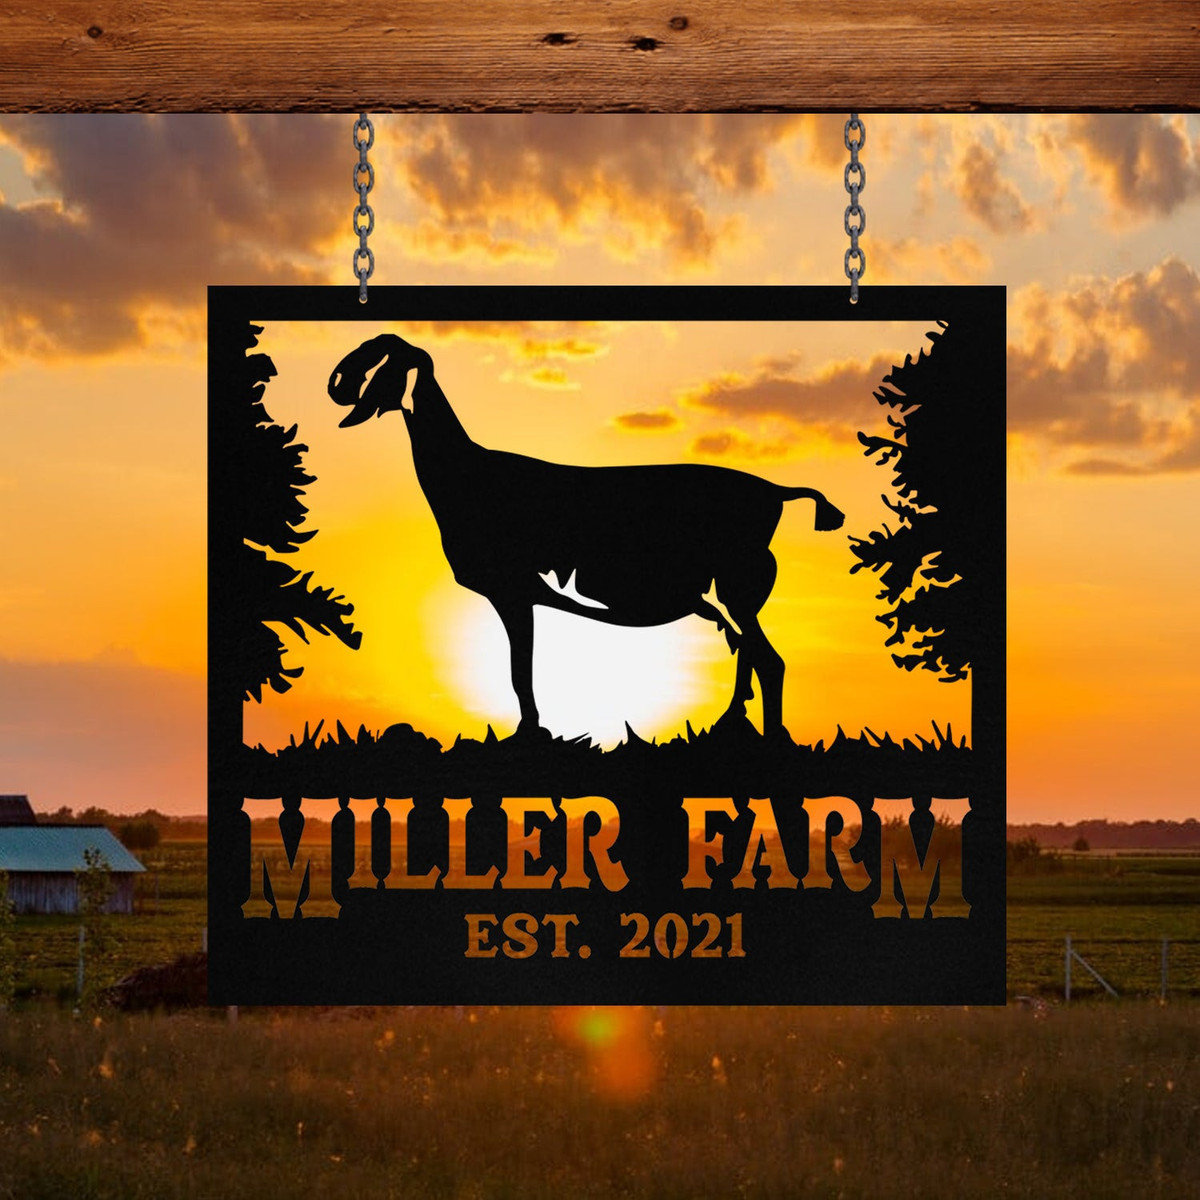 Personalized Metal Farm Sign Anglo Nubian Goat Monogram, Metal Laser Cut Metal Signs Custom Gift Ideas 12x12IN